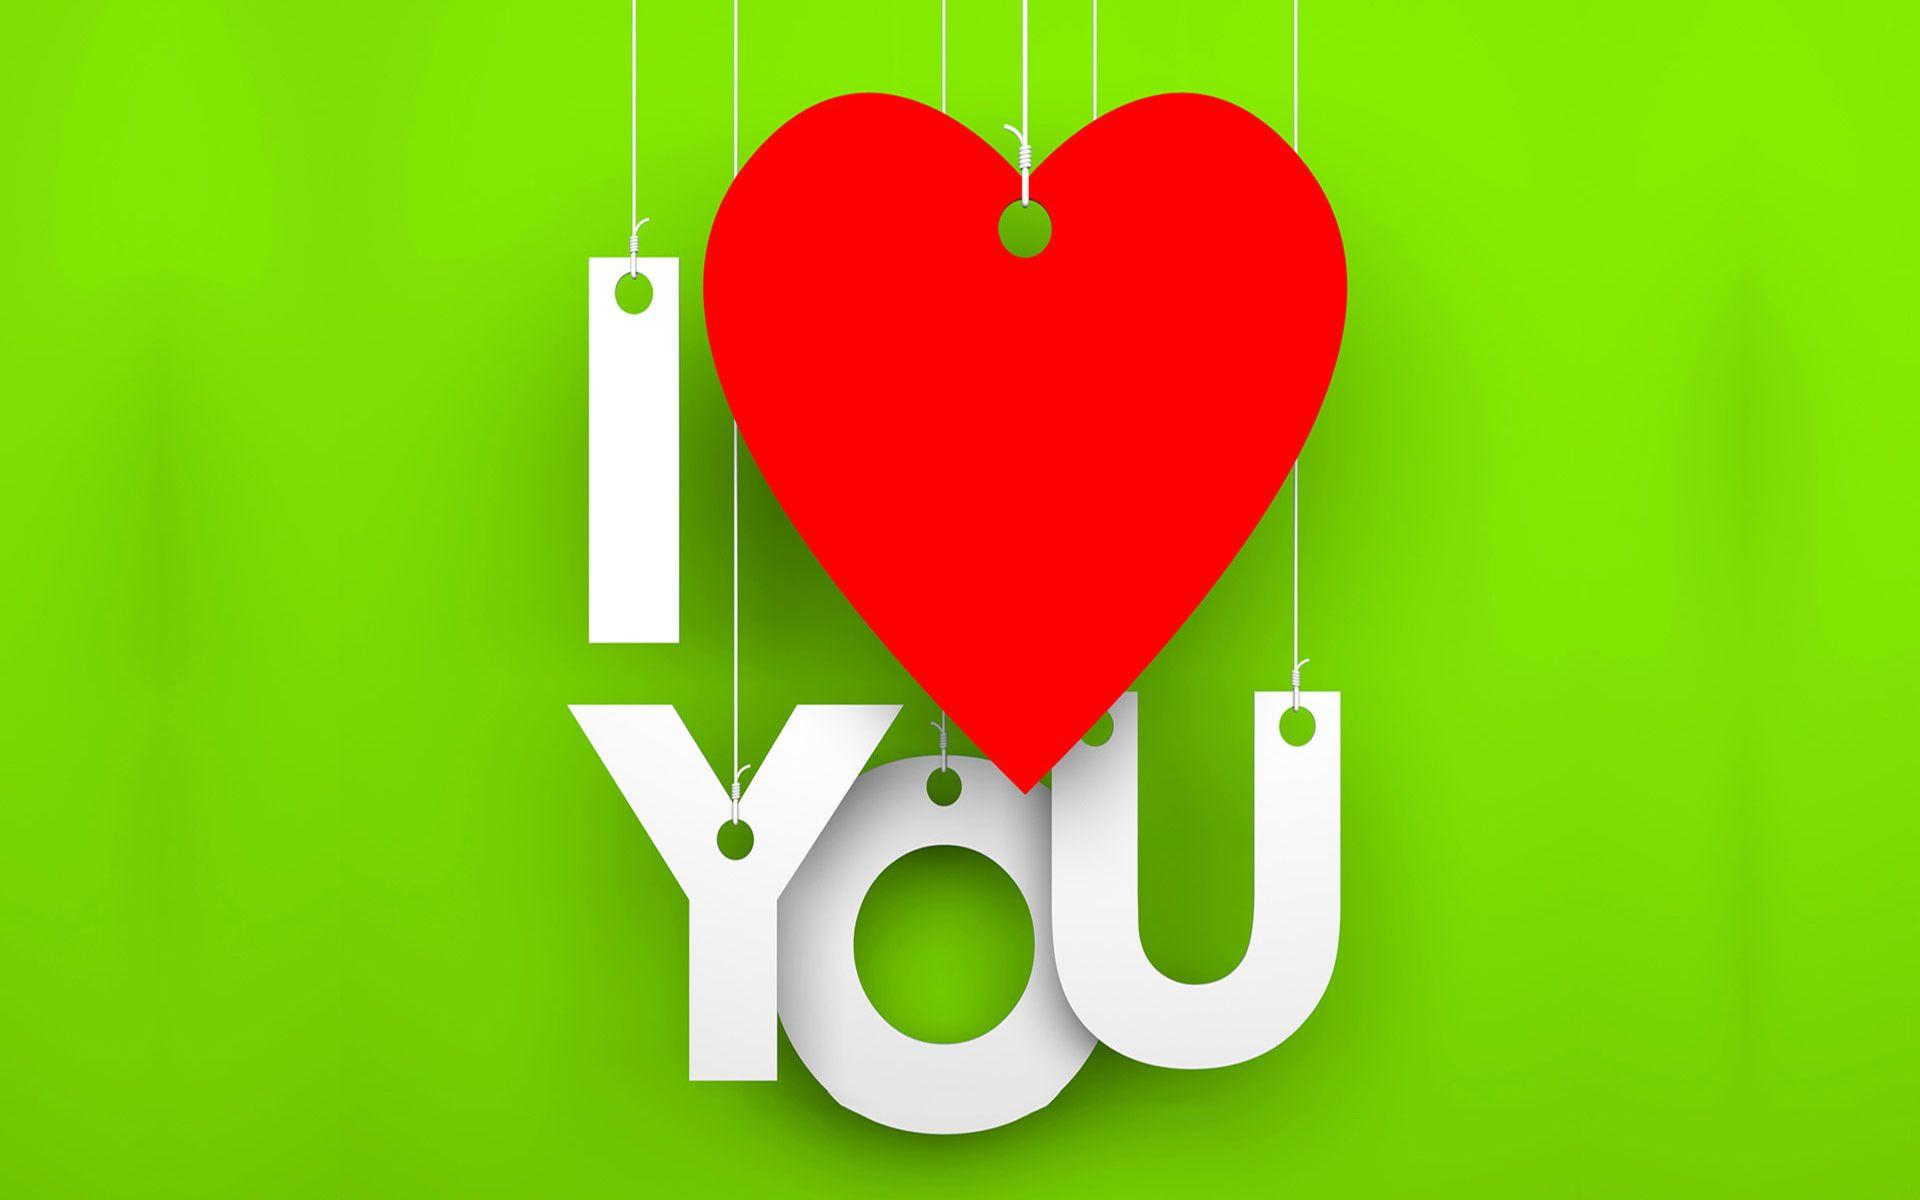 Cute I Love U Wallpaper For Mobile 10777 Image Picture Free